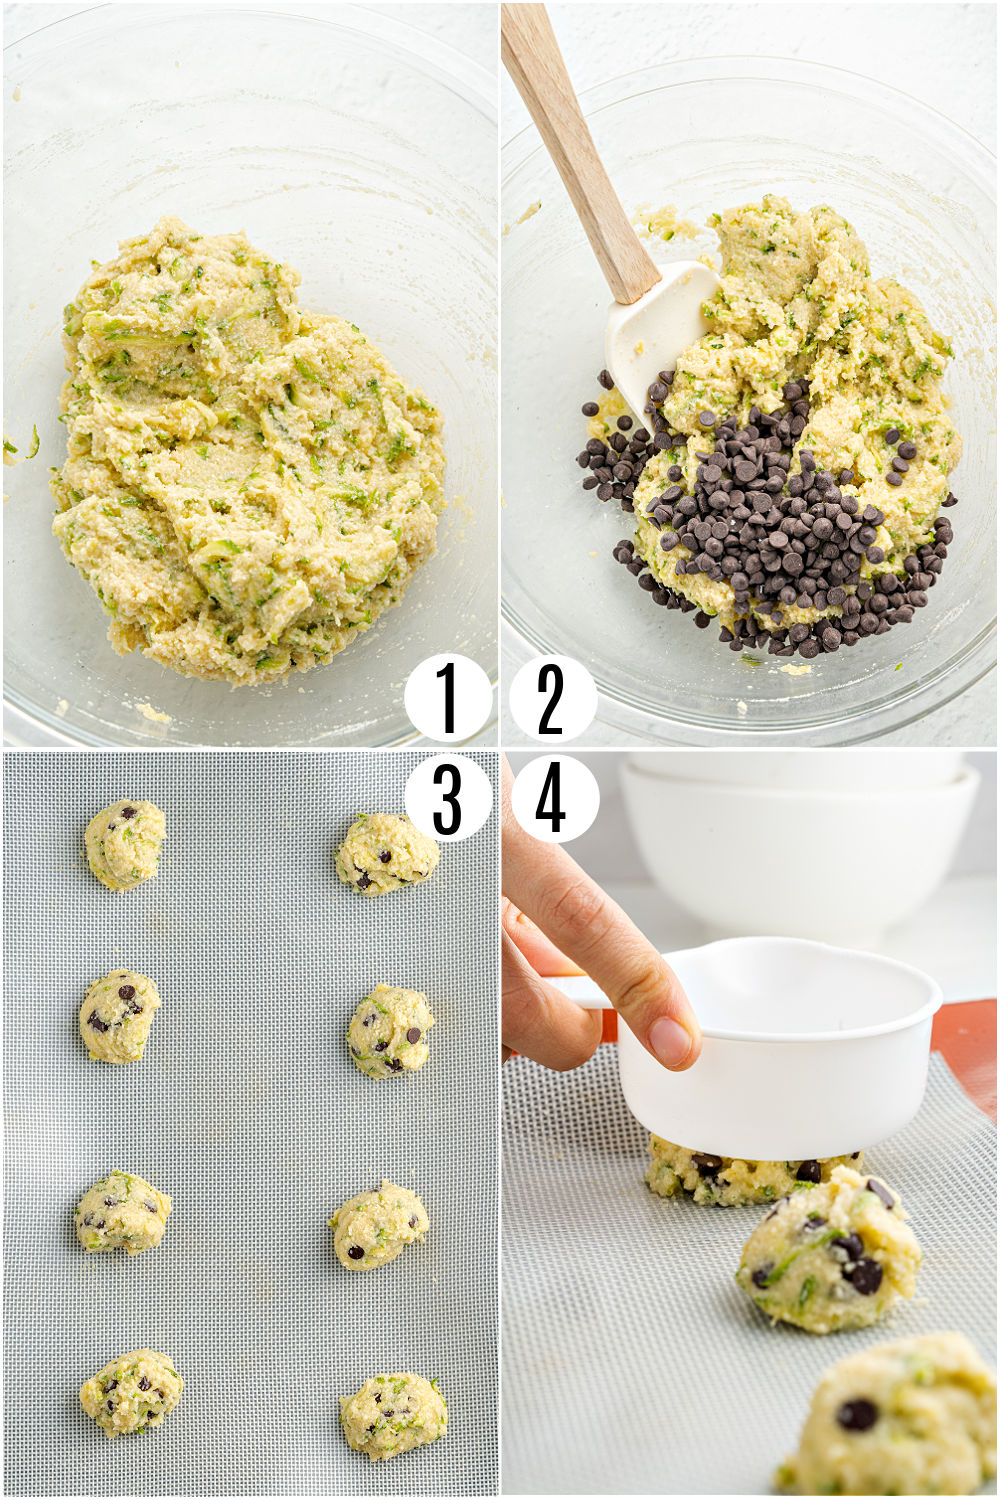 Step by step photos showing how to make zucchini cookies with chocolate chips.